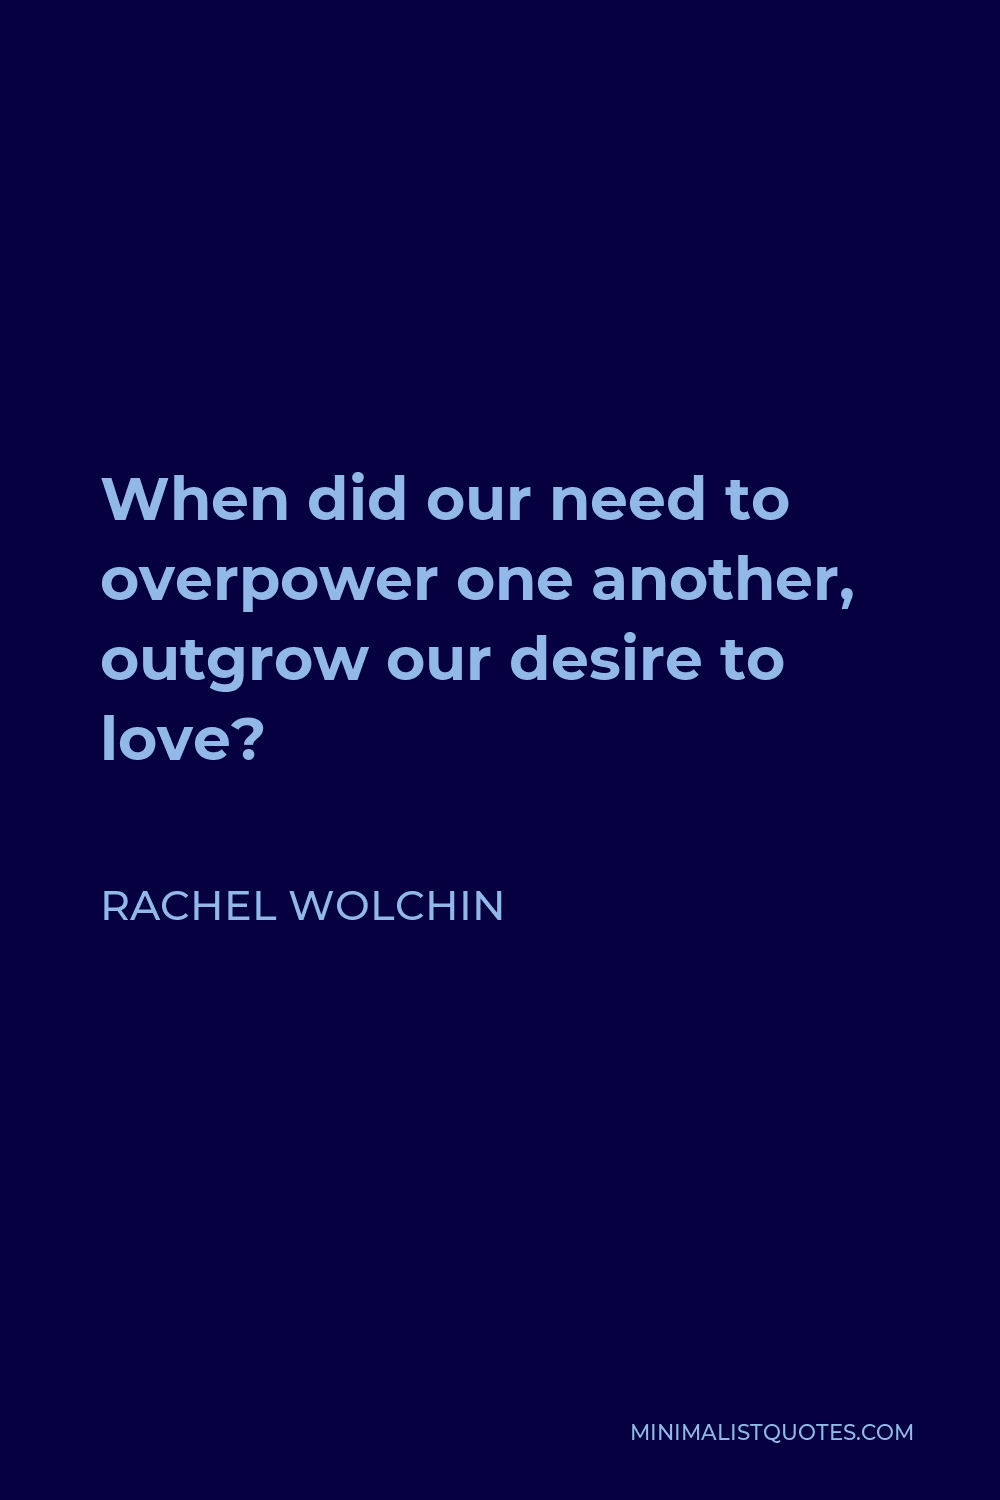 Rachel Wolchin Quote - When did our need to overpower one another, outgrow our desire to love?